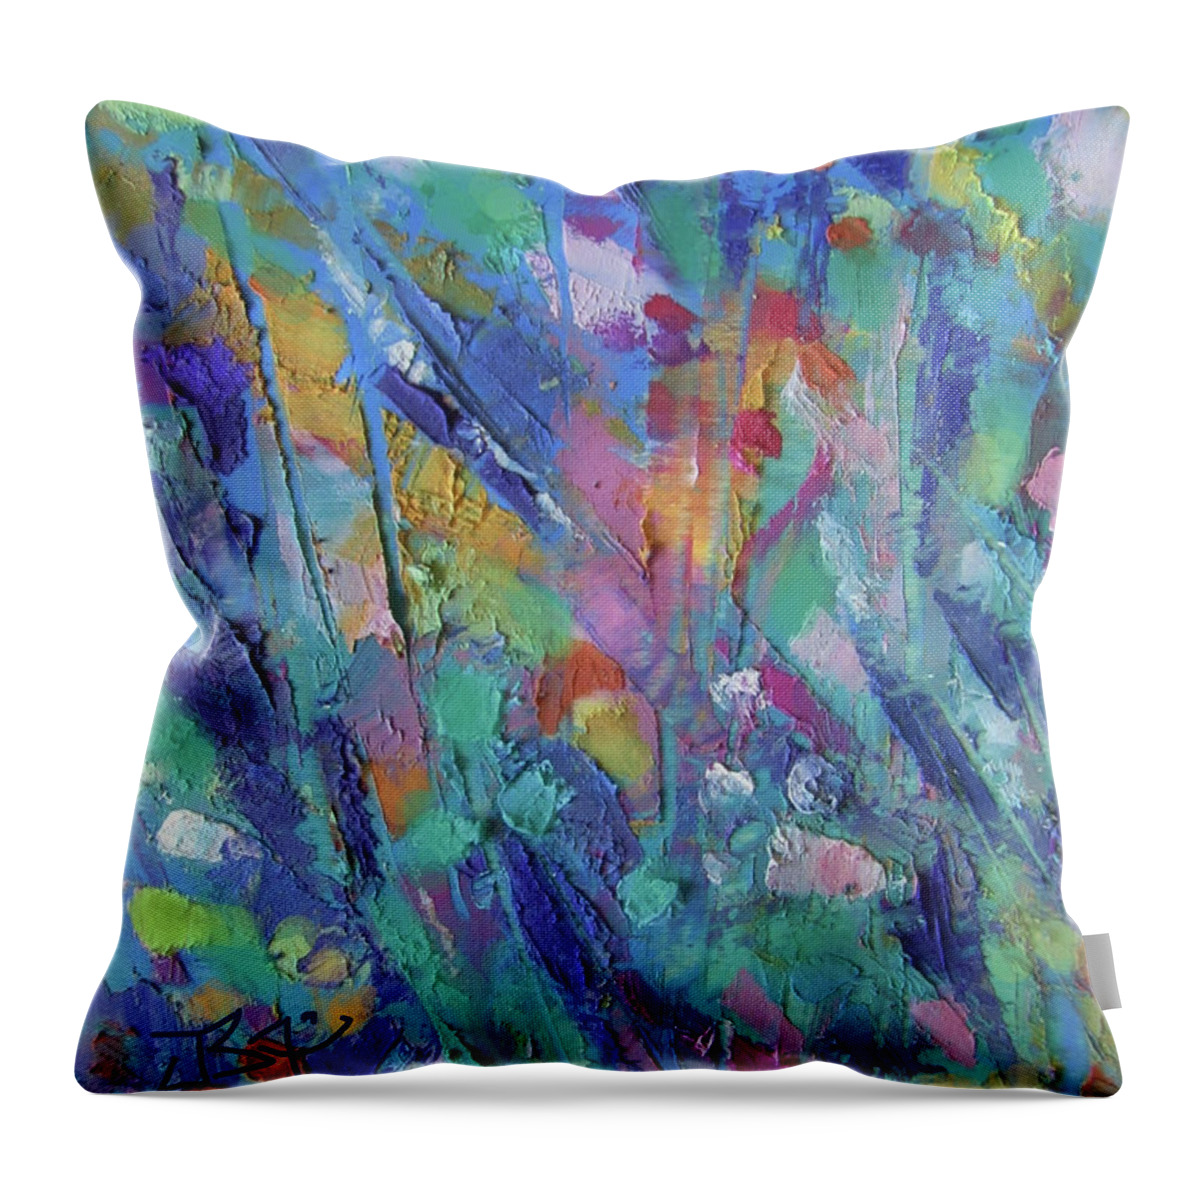 Cold Wax Throw Pillow featuring the painting Flower Medley by Jean Batzell Fitzgerald